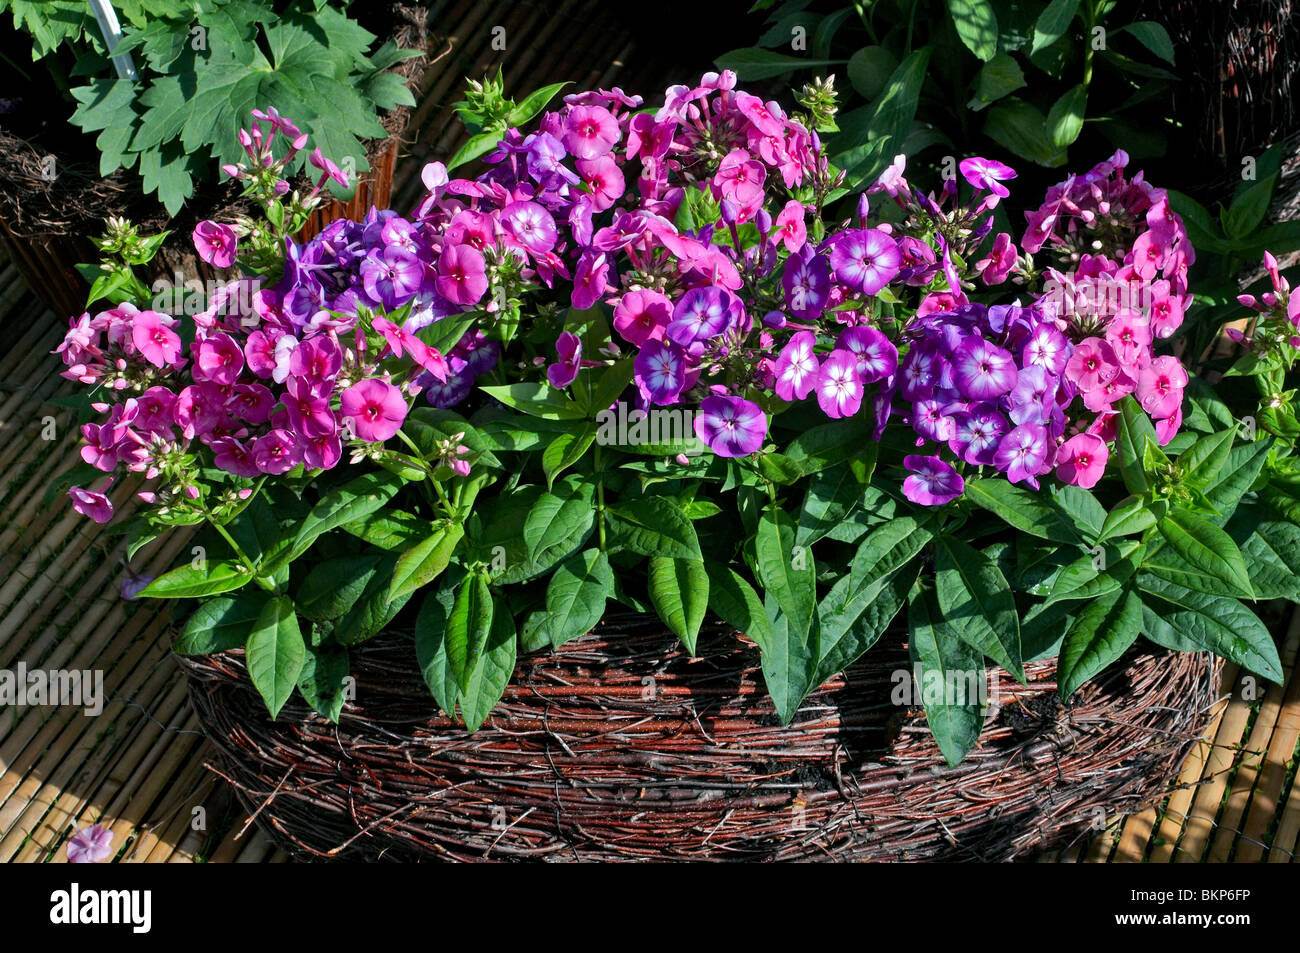 Decorative planting of Phlox in a woven basket Stock Photo